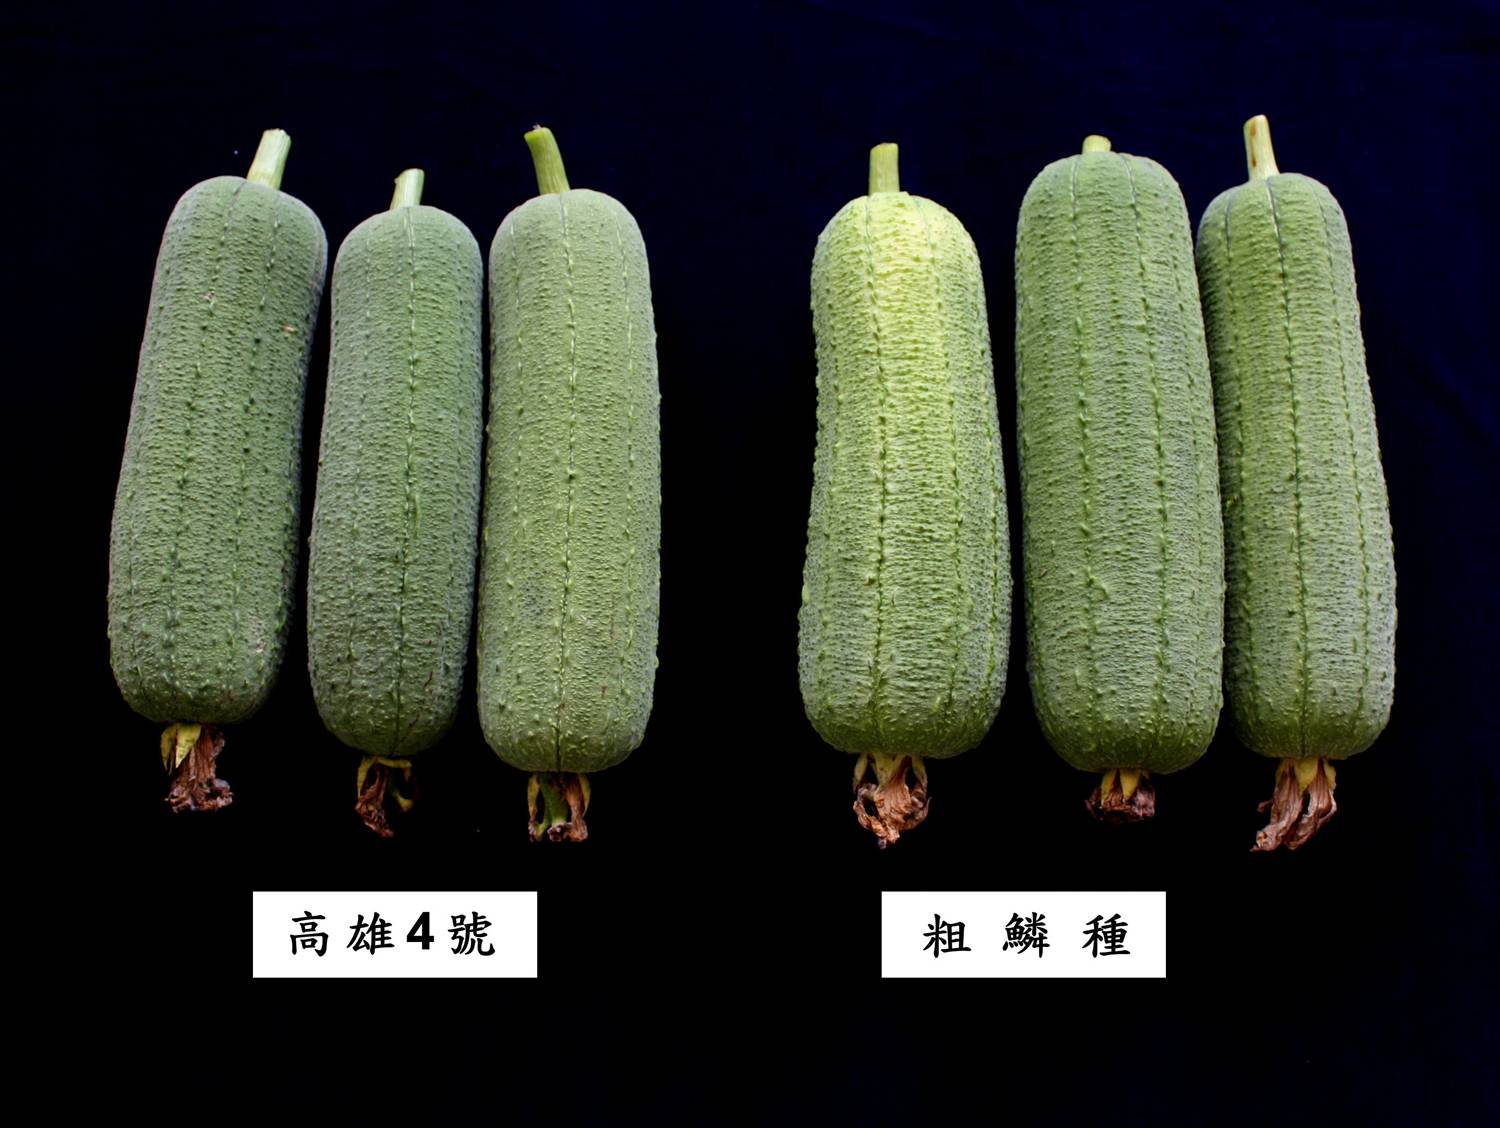 Sponge gourd variety Kaohsiung No.4 left and Culin right